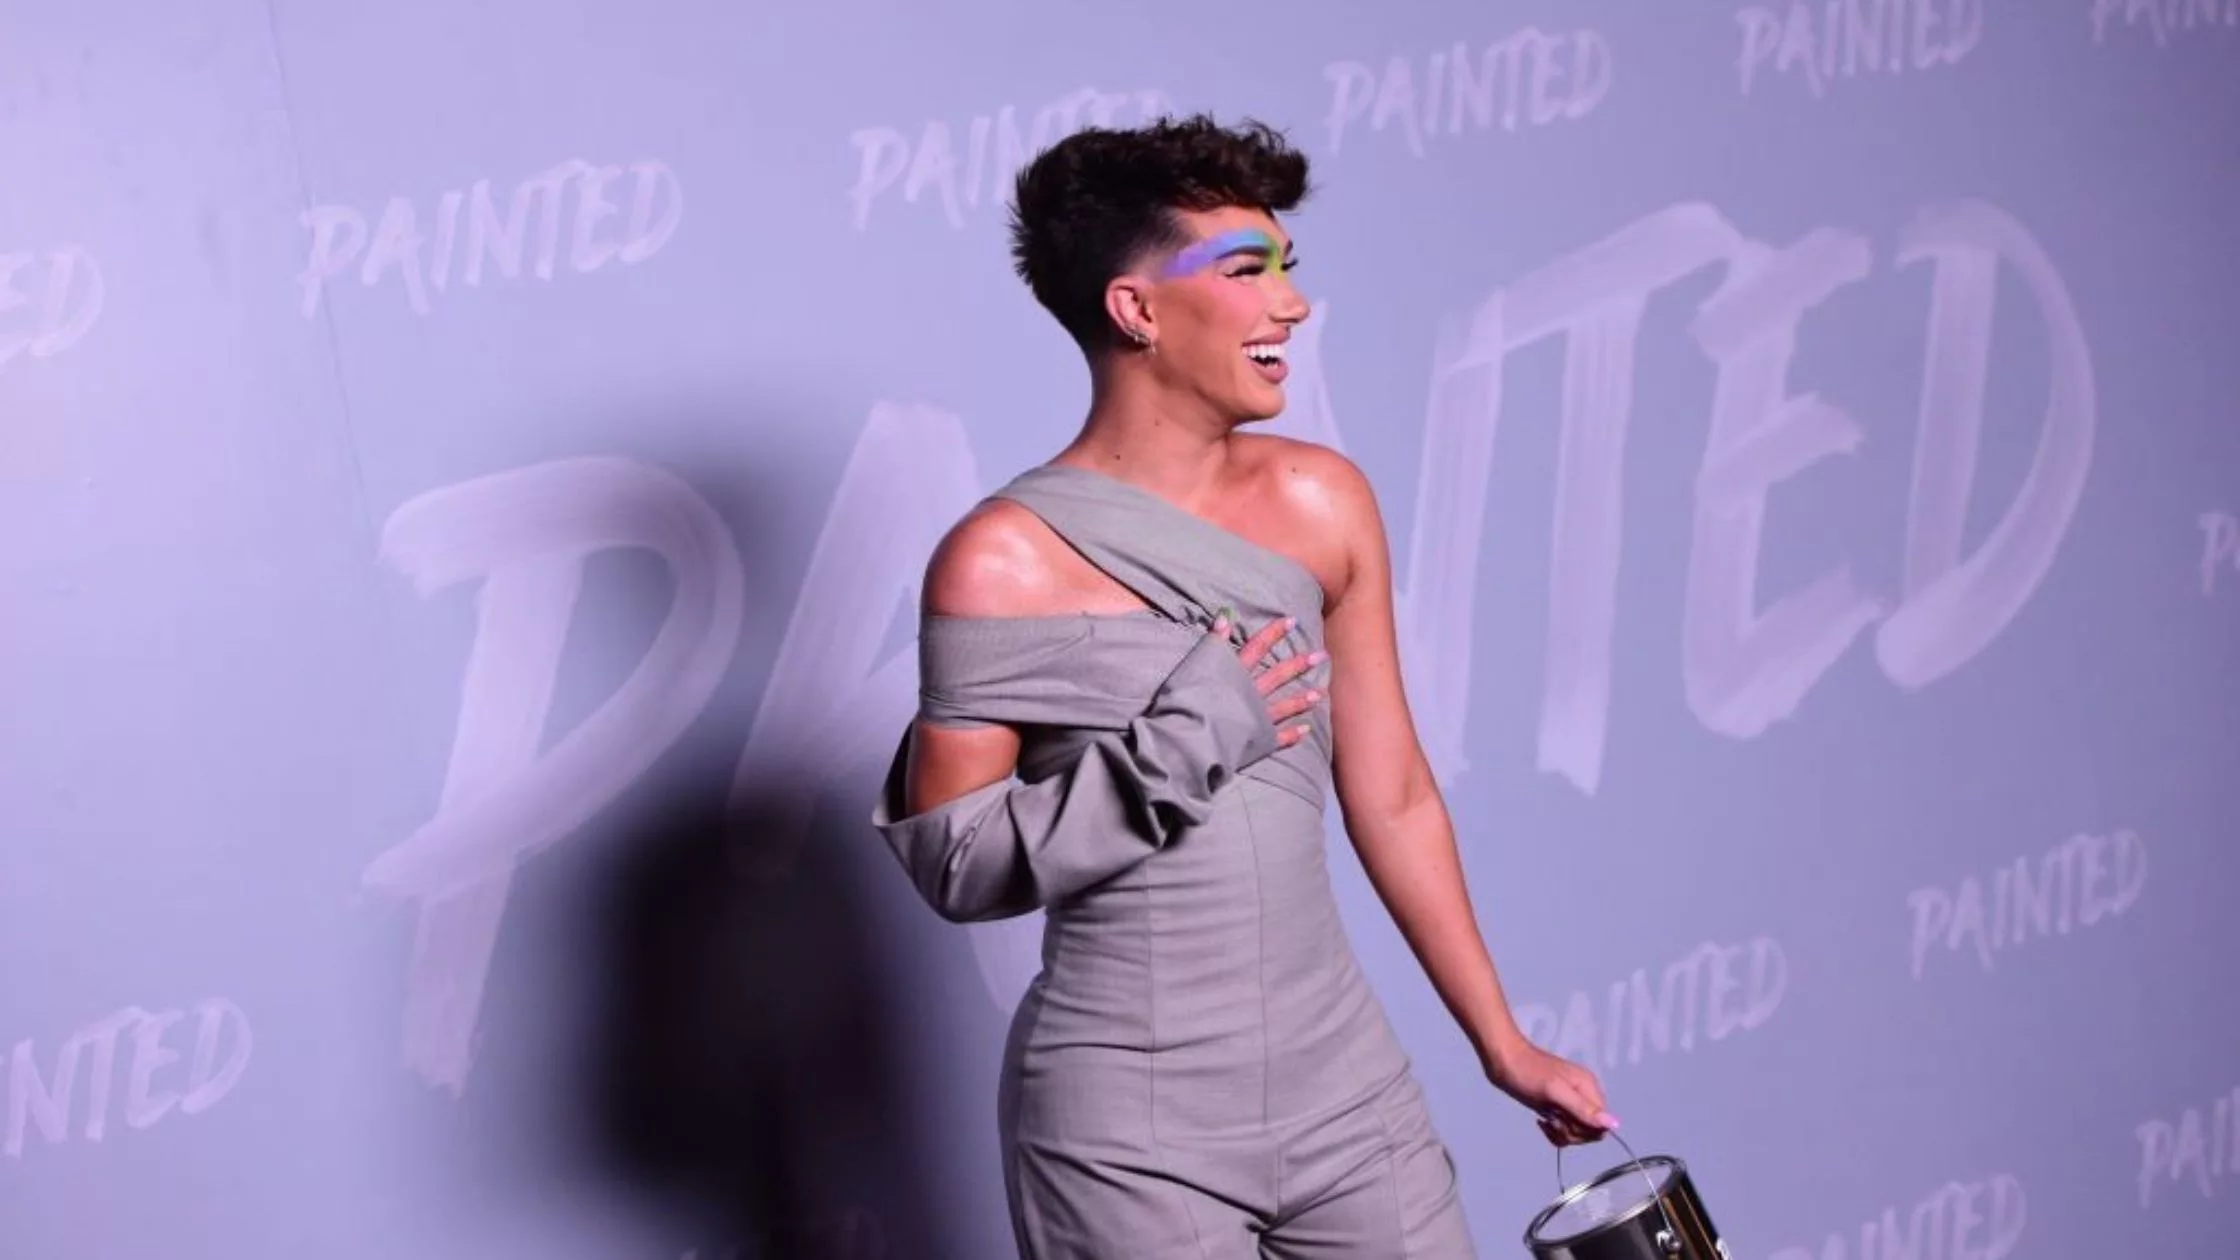 James Charles attends the Painted launch party